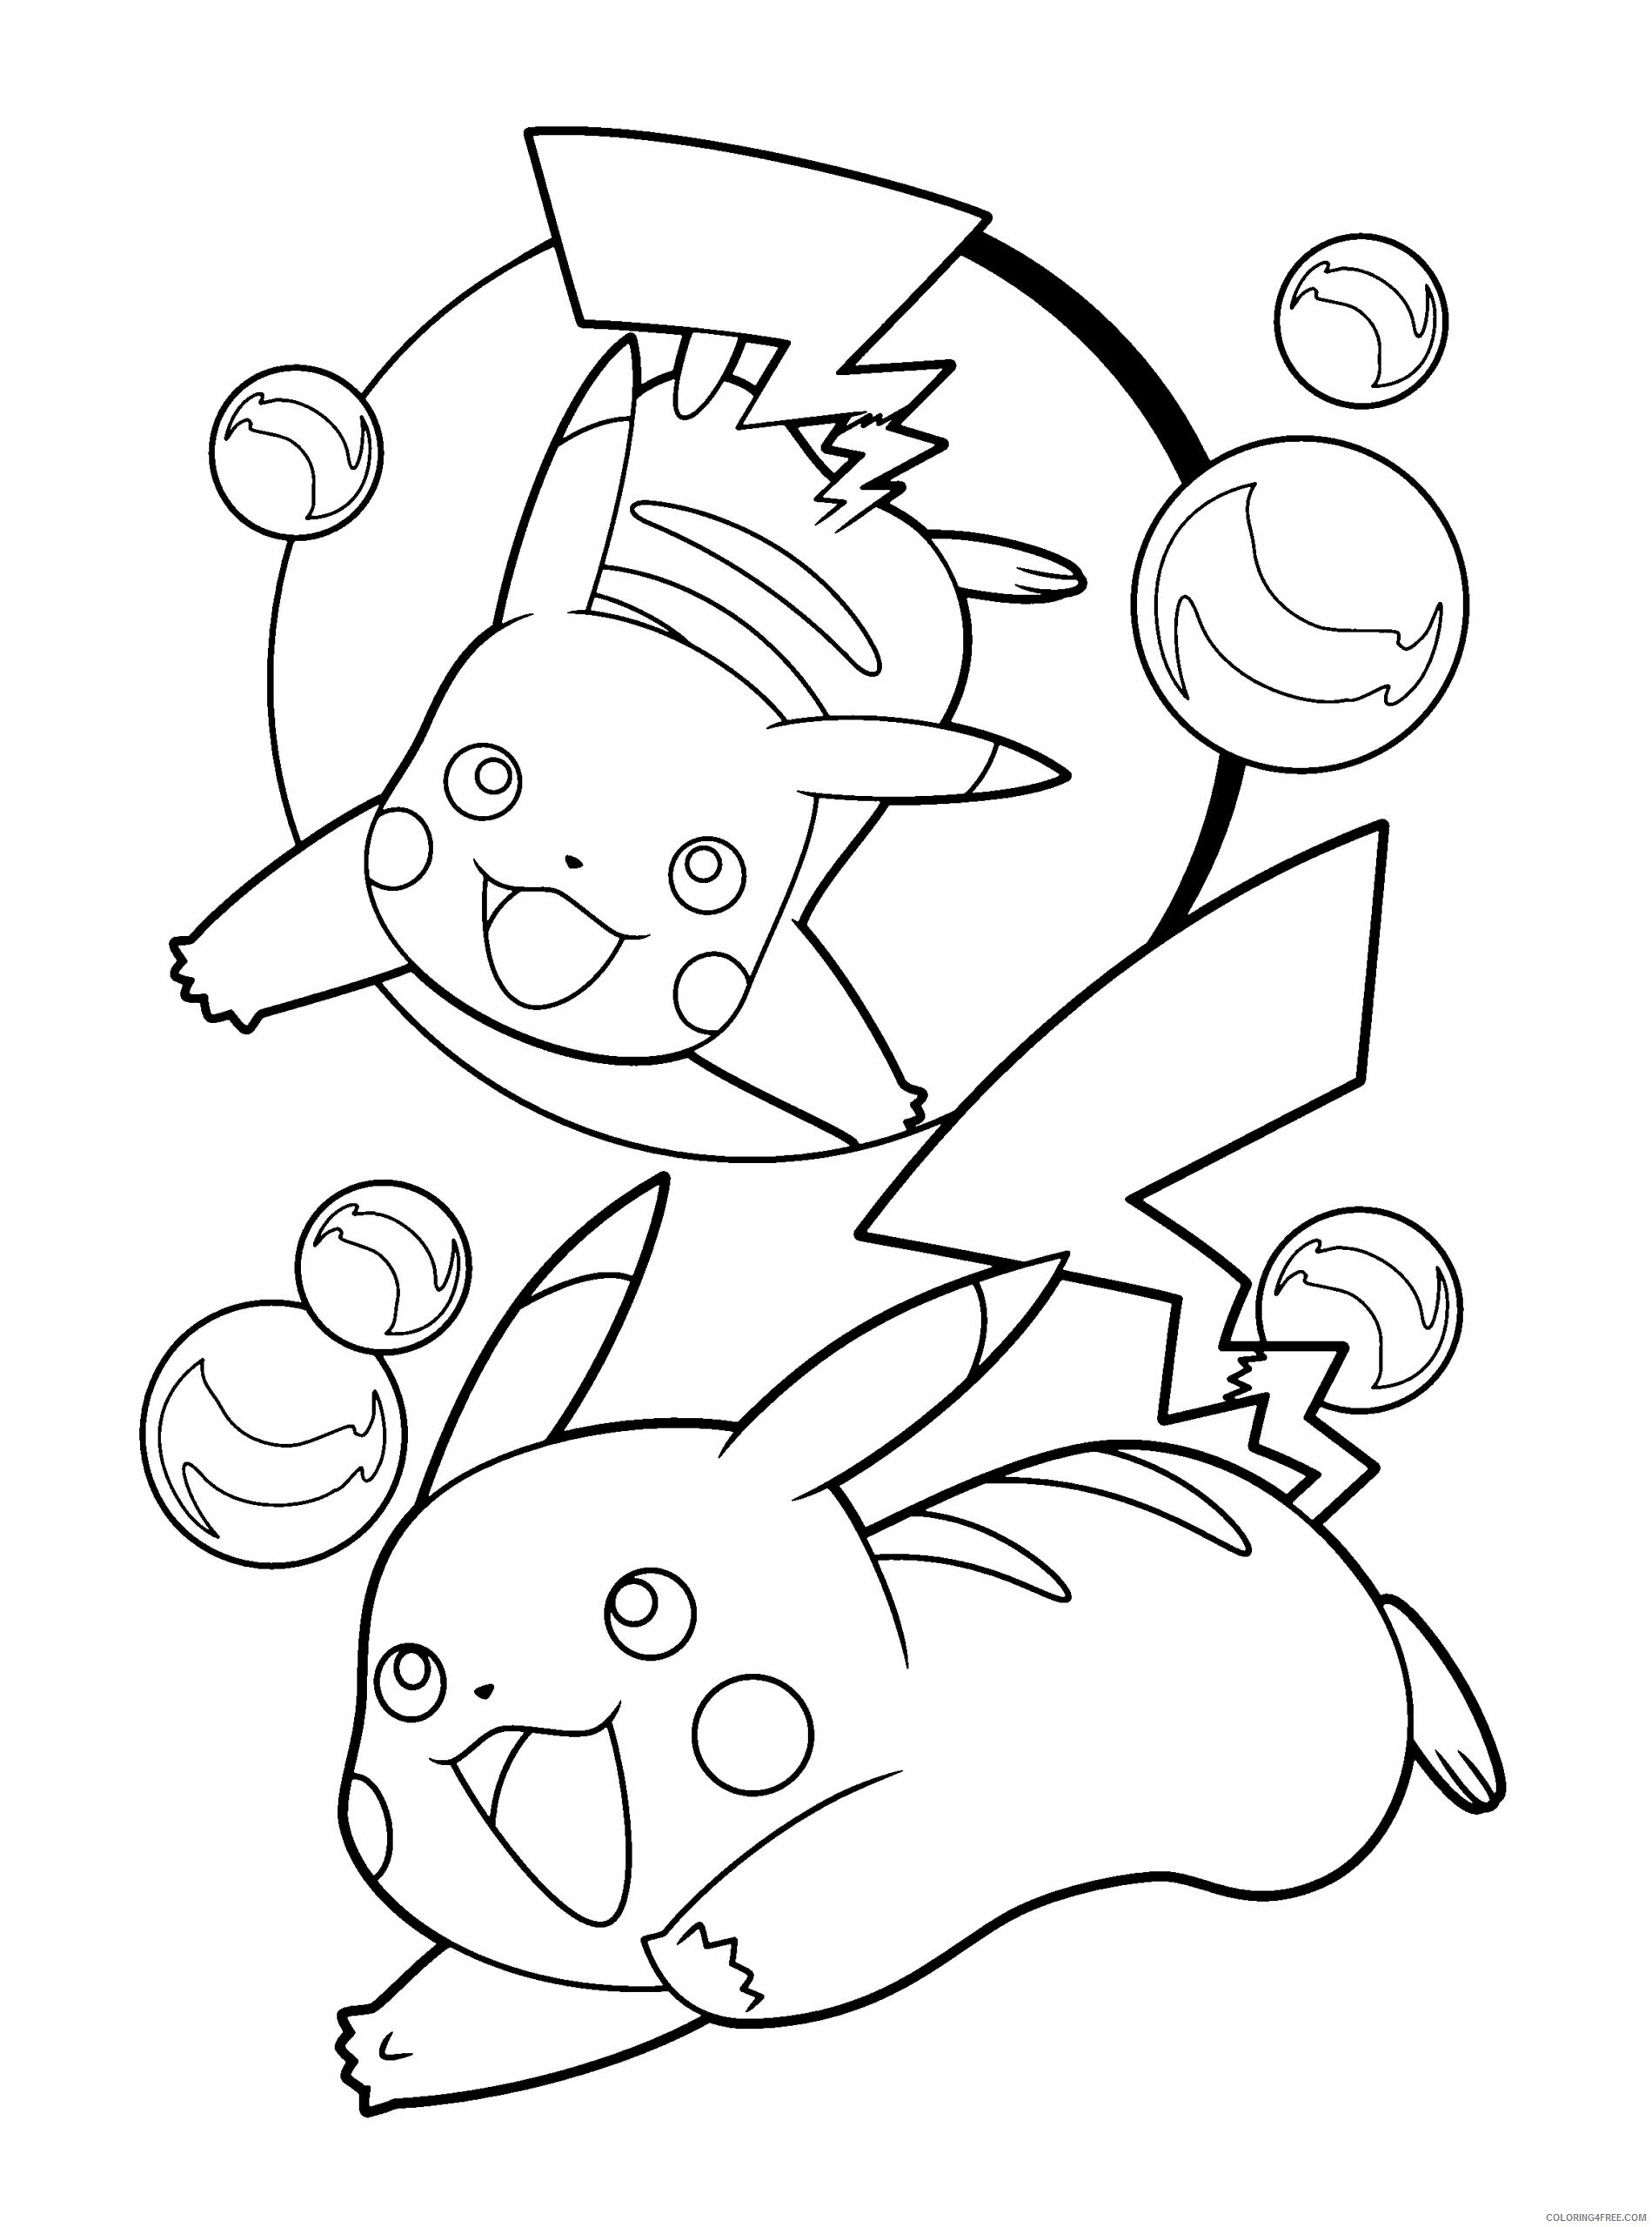 Pokemon Diamond and Pearl Coloring Pages Games Printable 2021 0875 Coloring4free